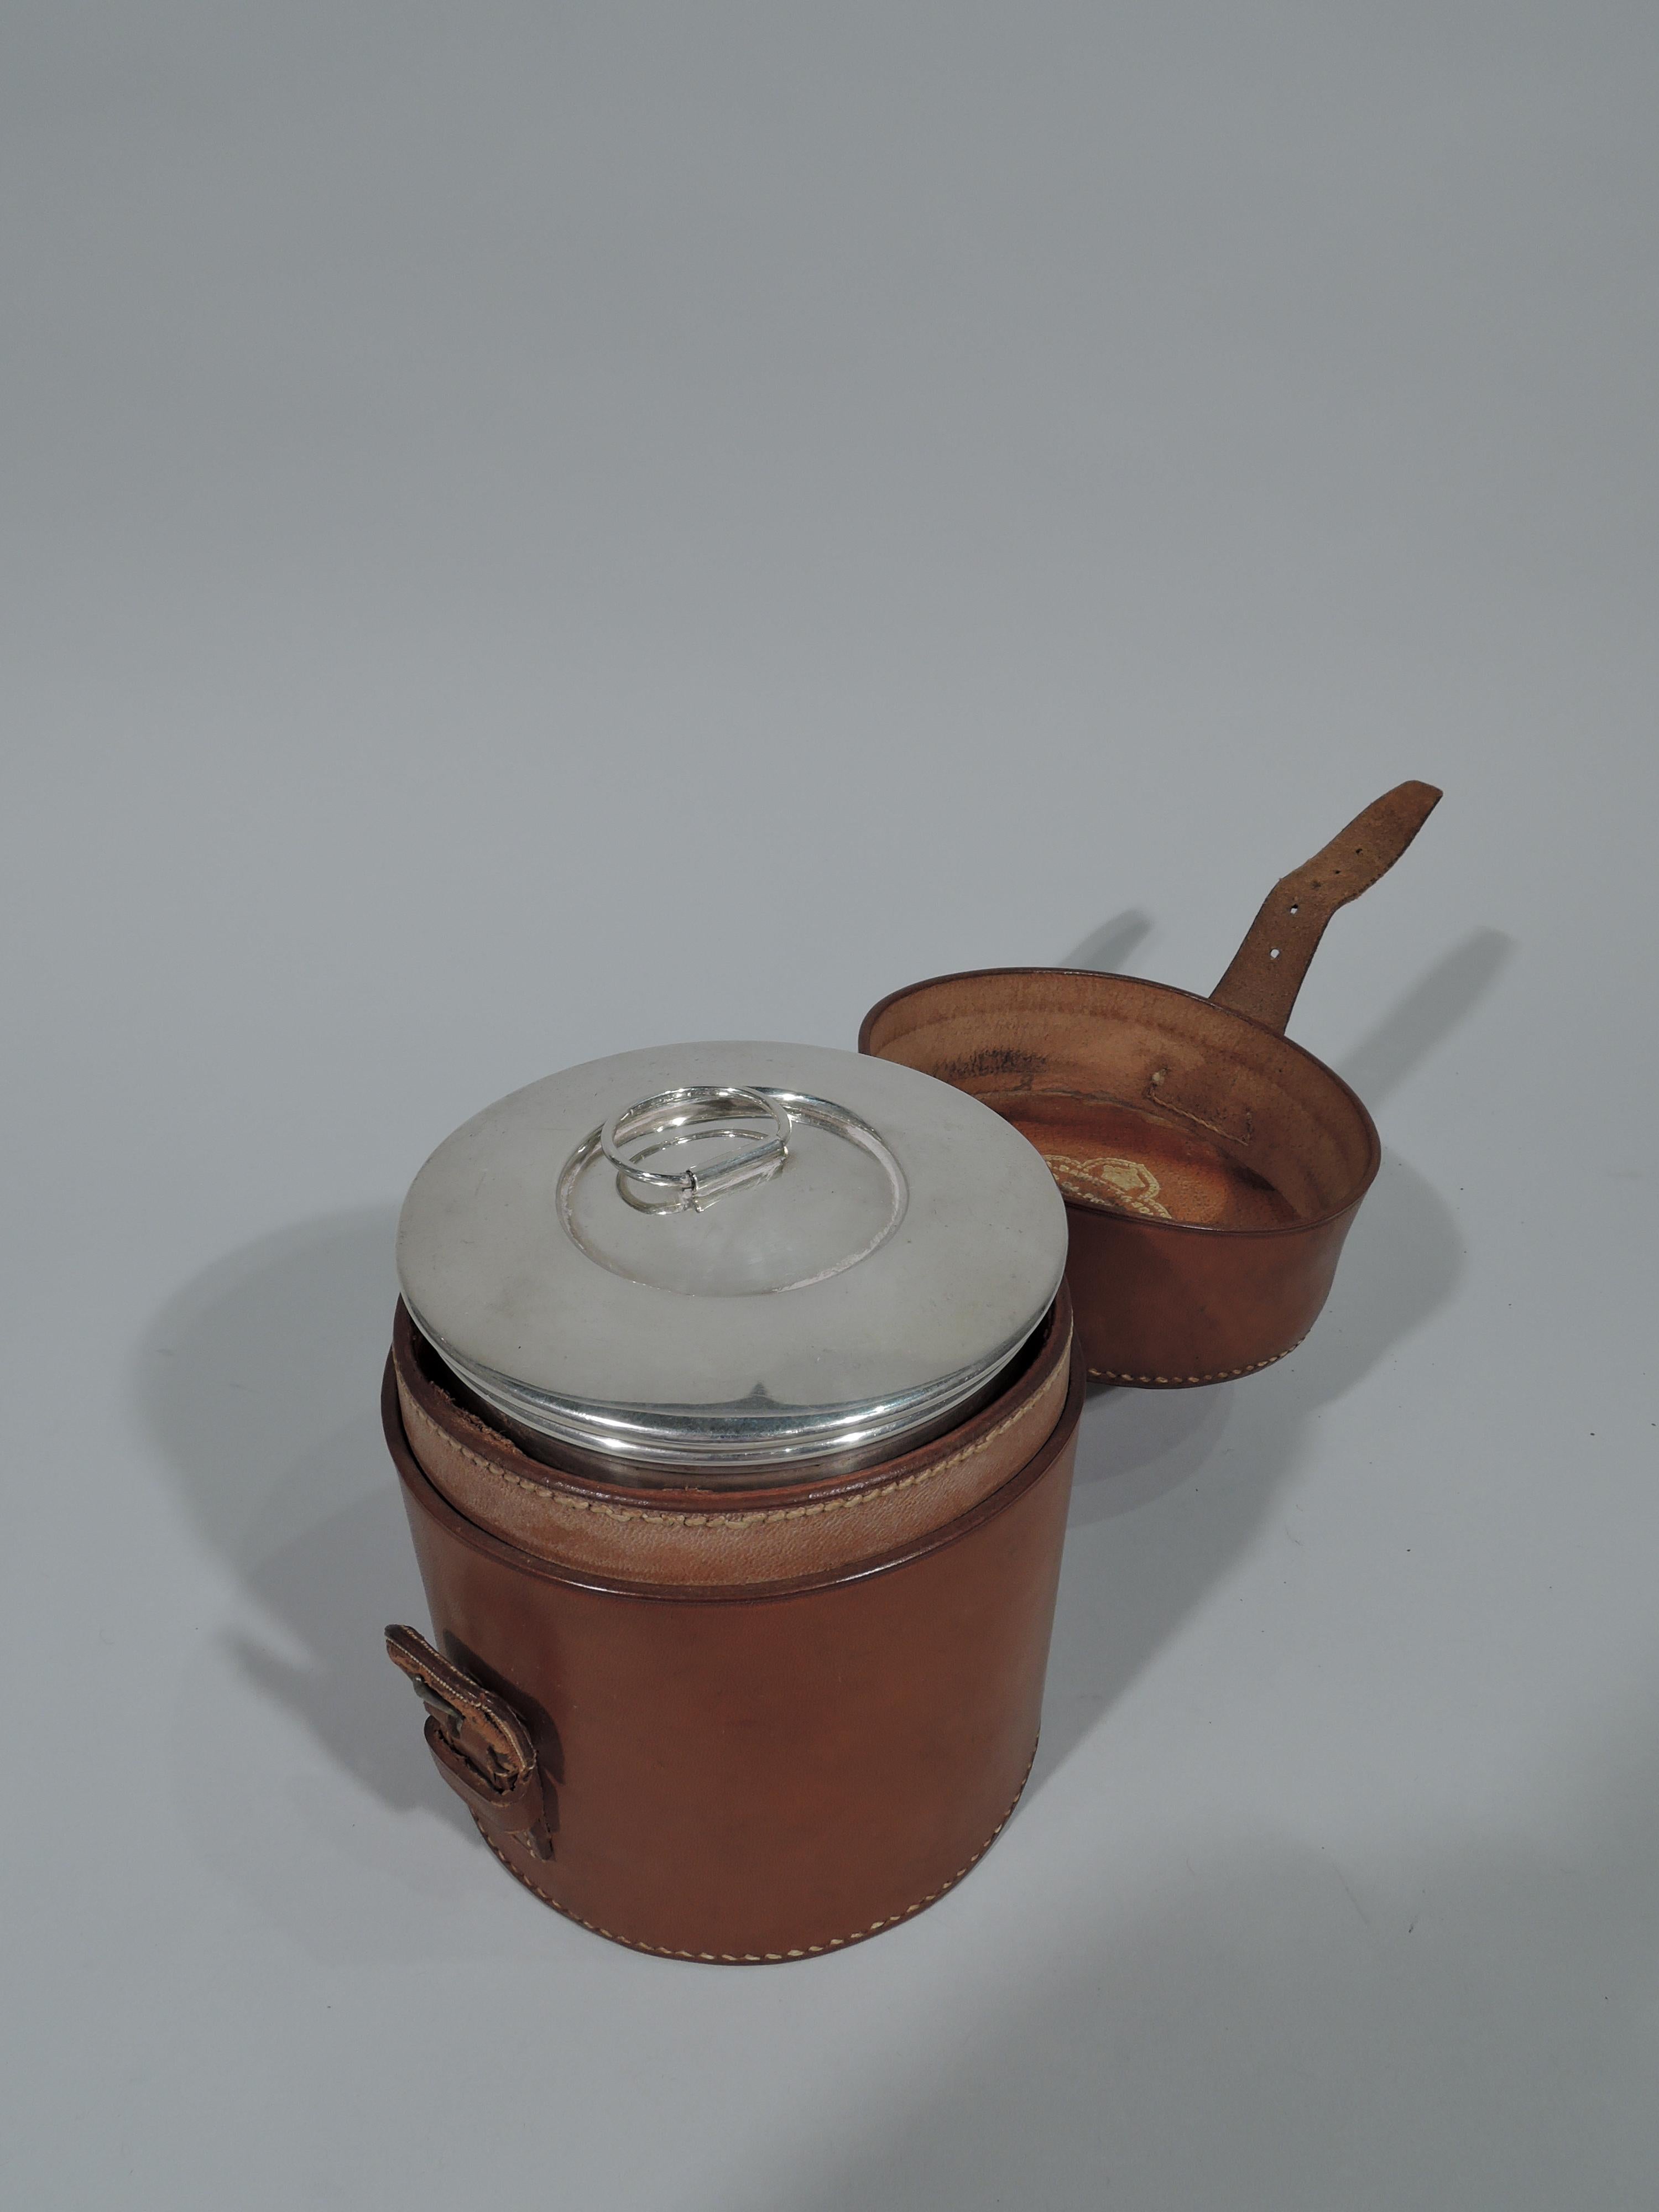 Edwardian sterling silver portable water pot. Made by A. Barrett & Sons in London in 1906. Drum form with small spout and carved and threaded handle. Snug-fitting cover with loose ring finial. Burner, fuel canister, and Stand. Engraved armorial was